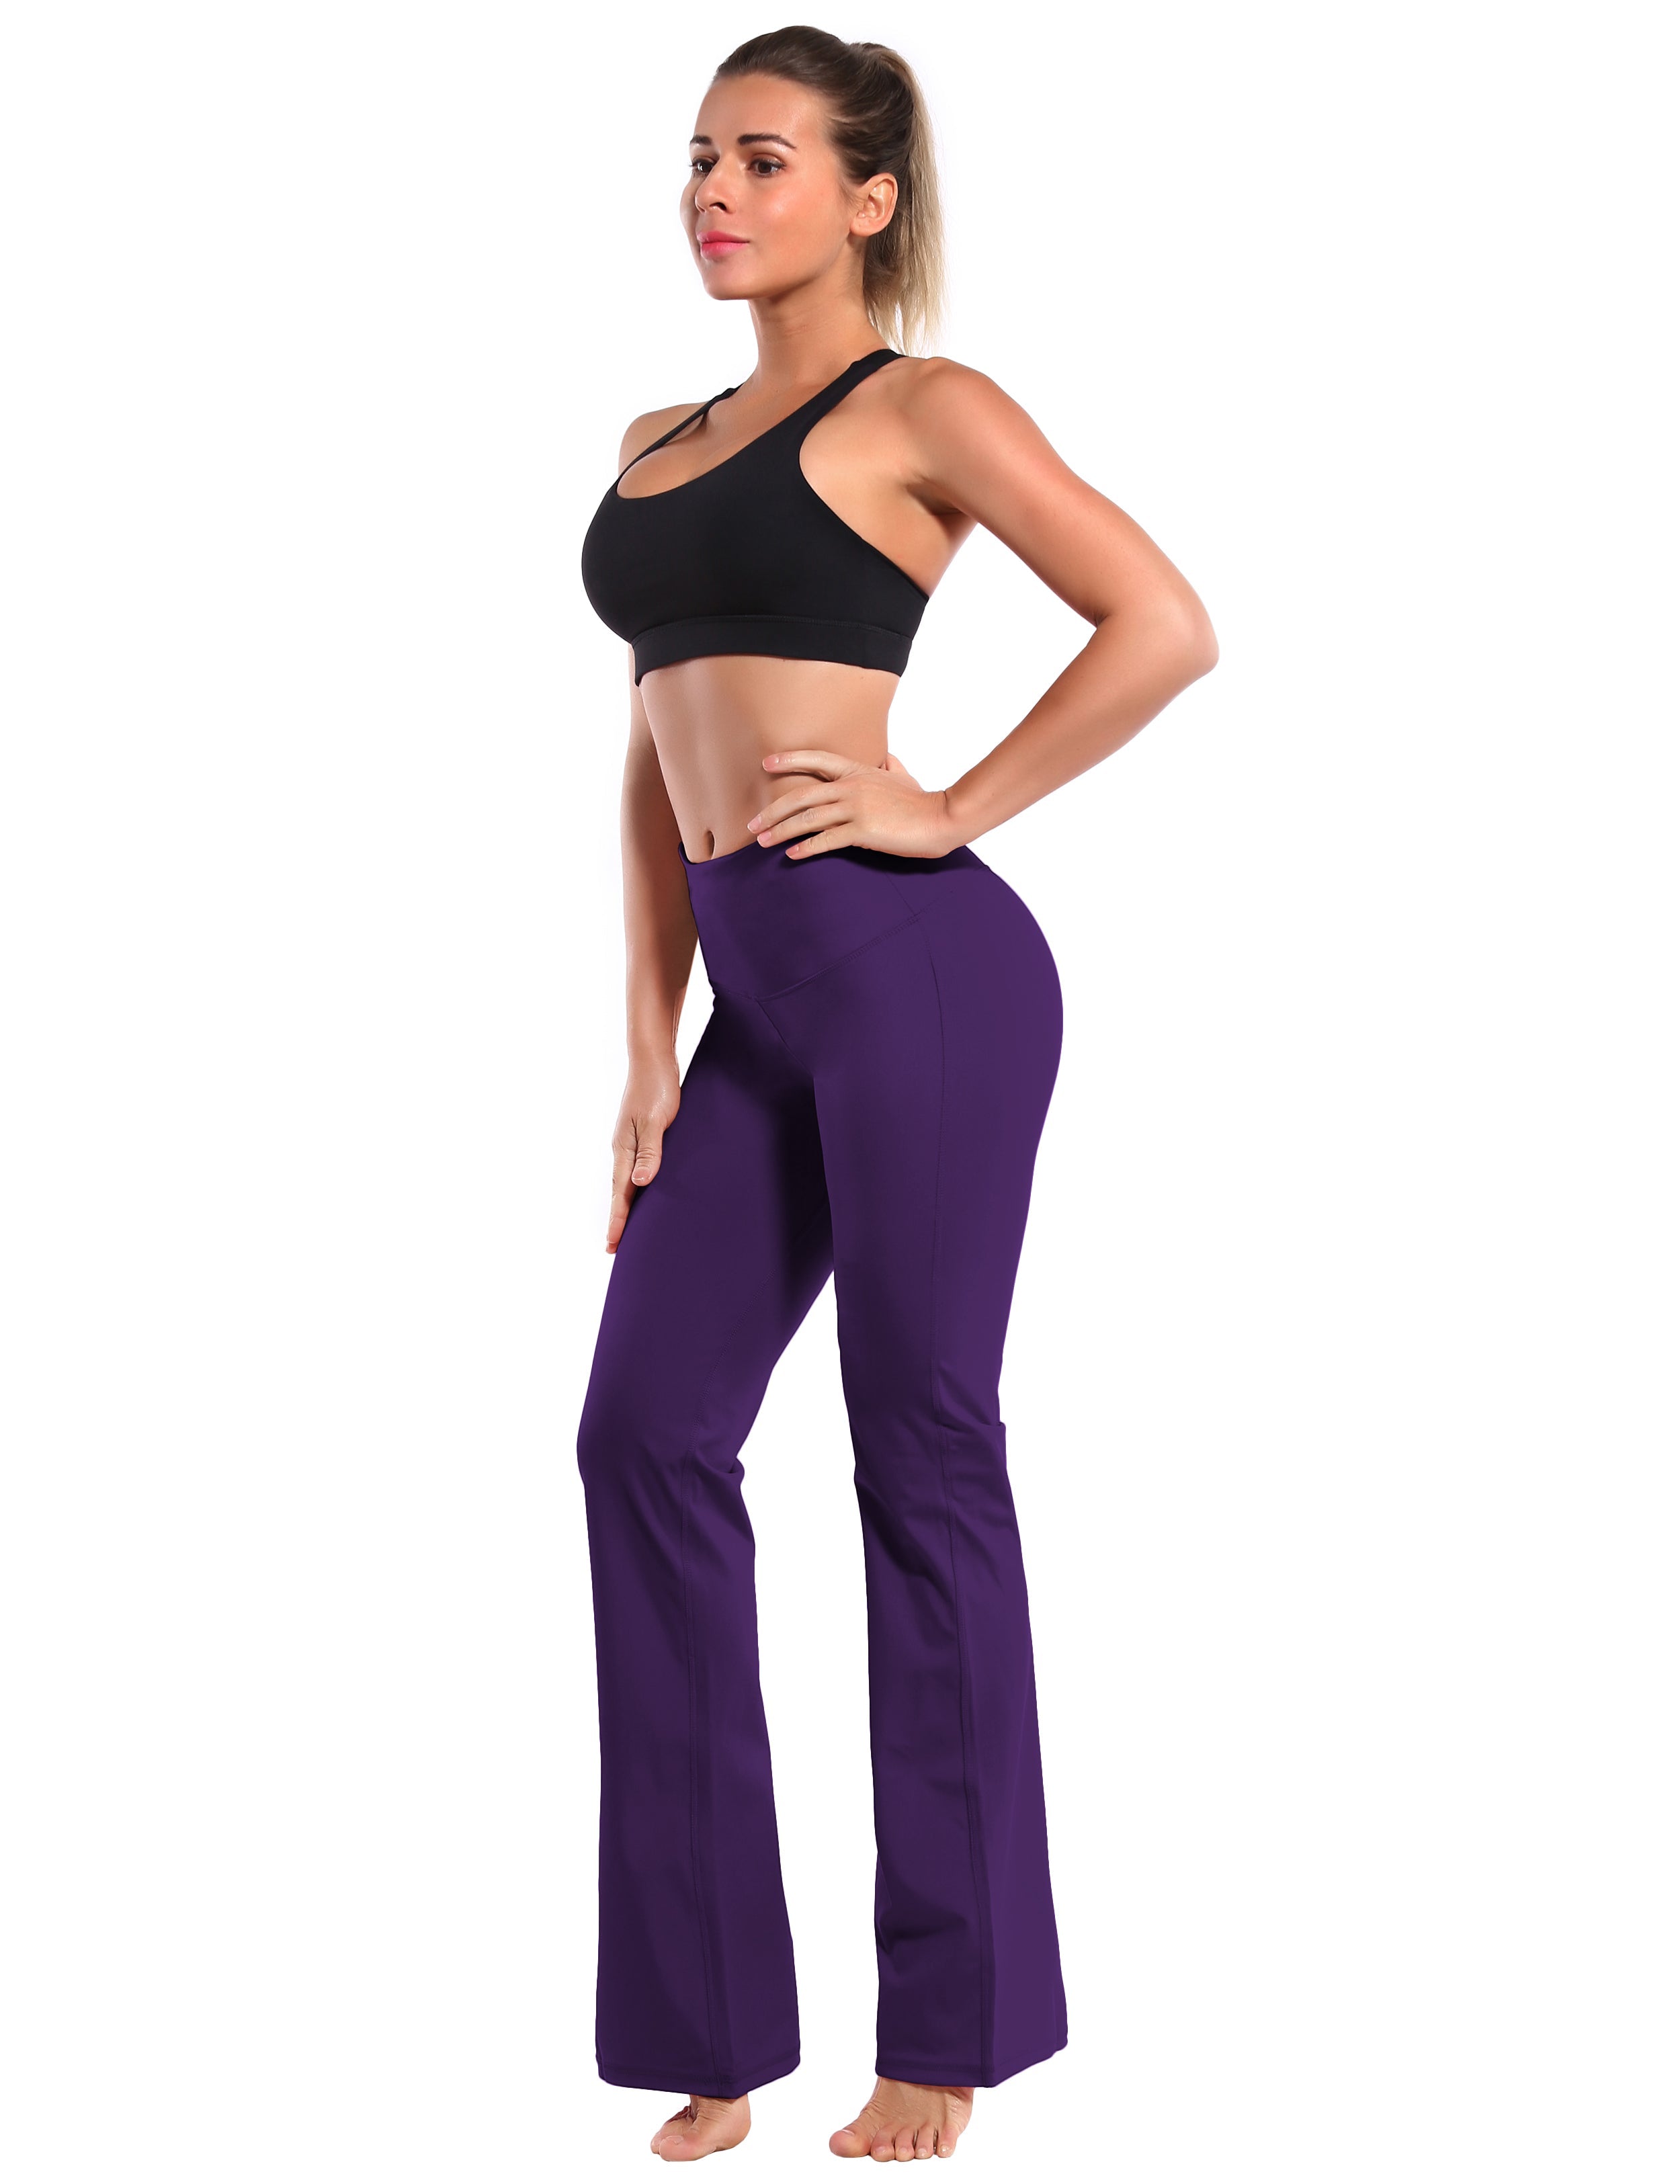 High Waist Bootcut Leggings Eggplantpurple 75%Nylon/25%Spandex Fabric doesn't attract lint easily 4-way stretch No see-through Moisture-wicking Tummy control Inner pocket Five lengths